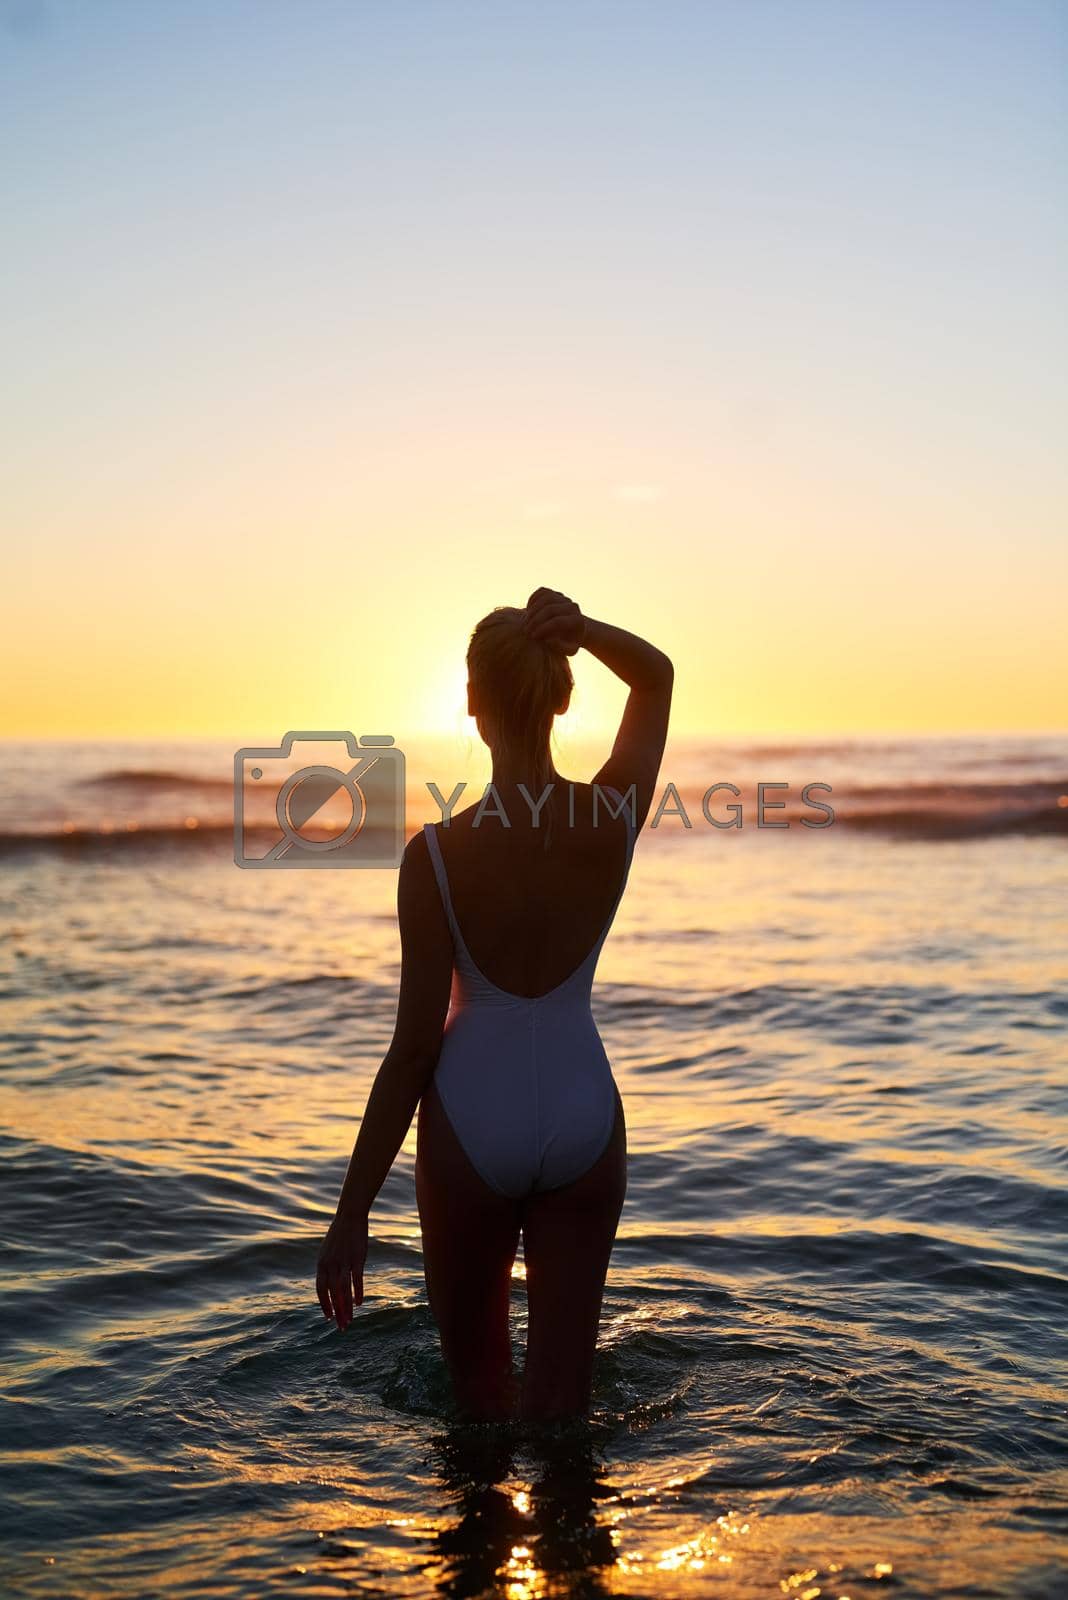 Rearview shot of a young woman standing in the water at sunset.